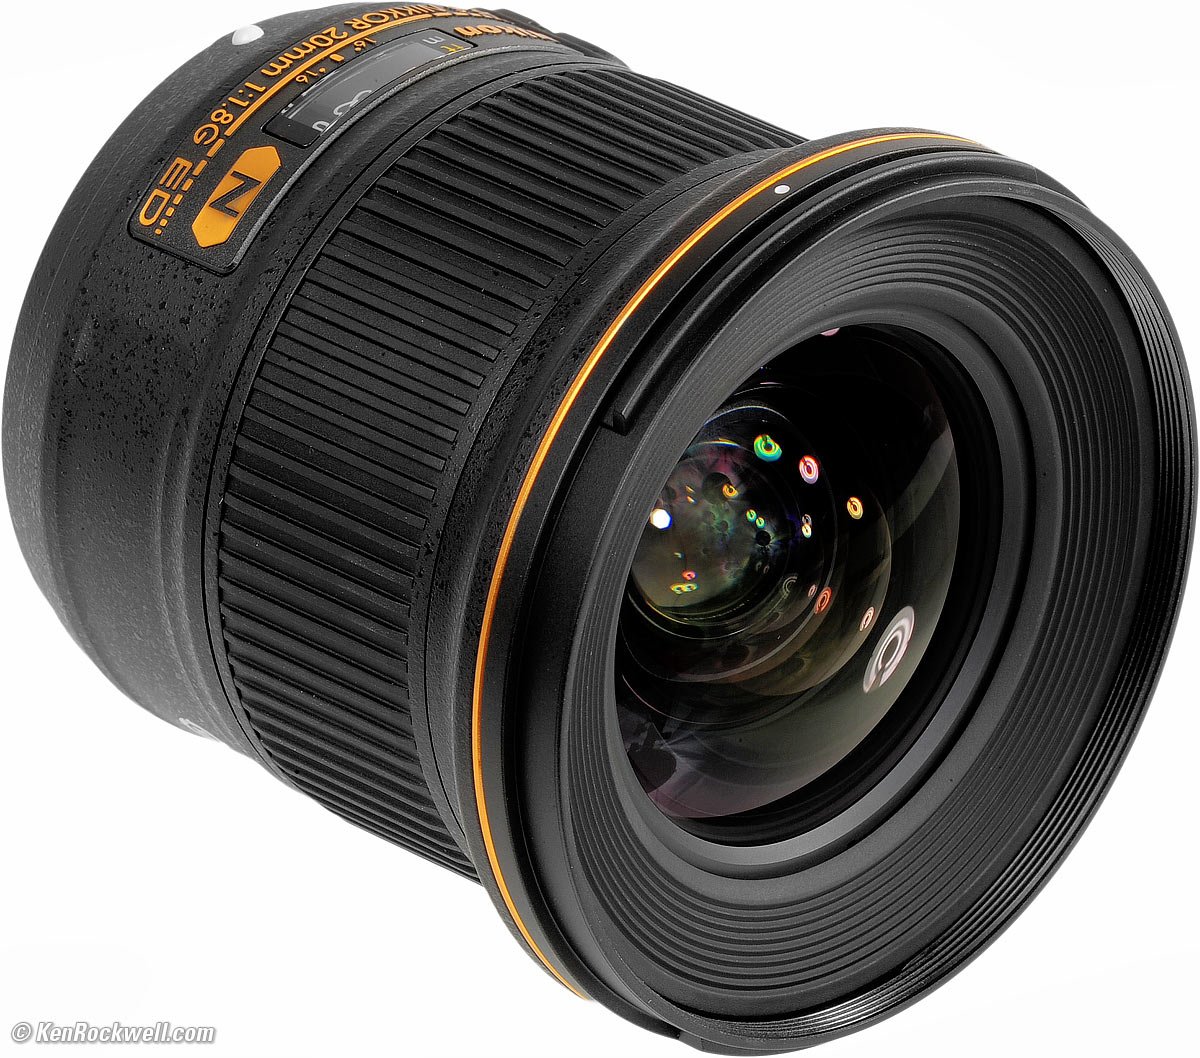 Nikon 20mm f/1.8 Review & Sample Images by Ken Rockwell